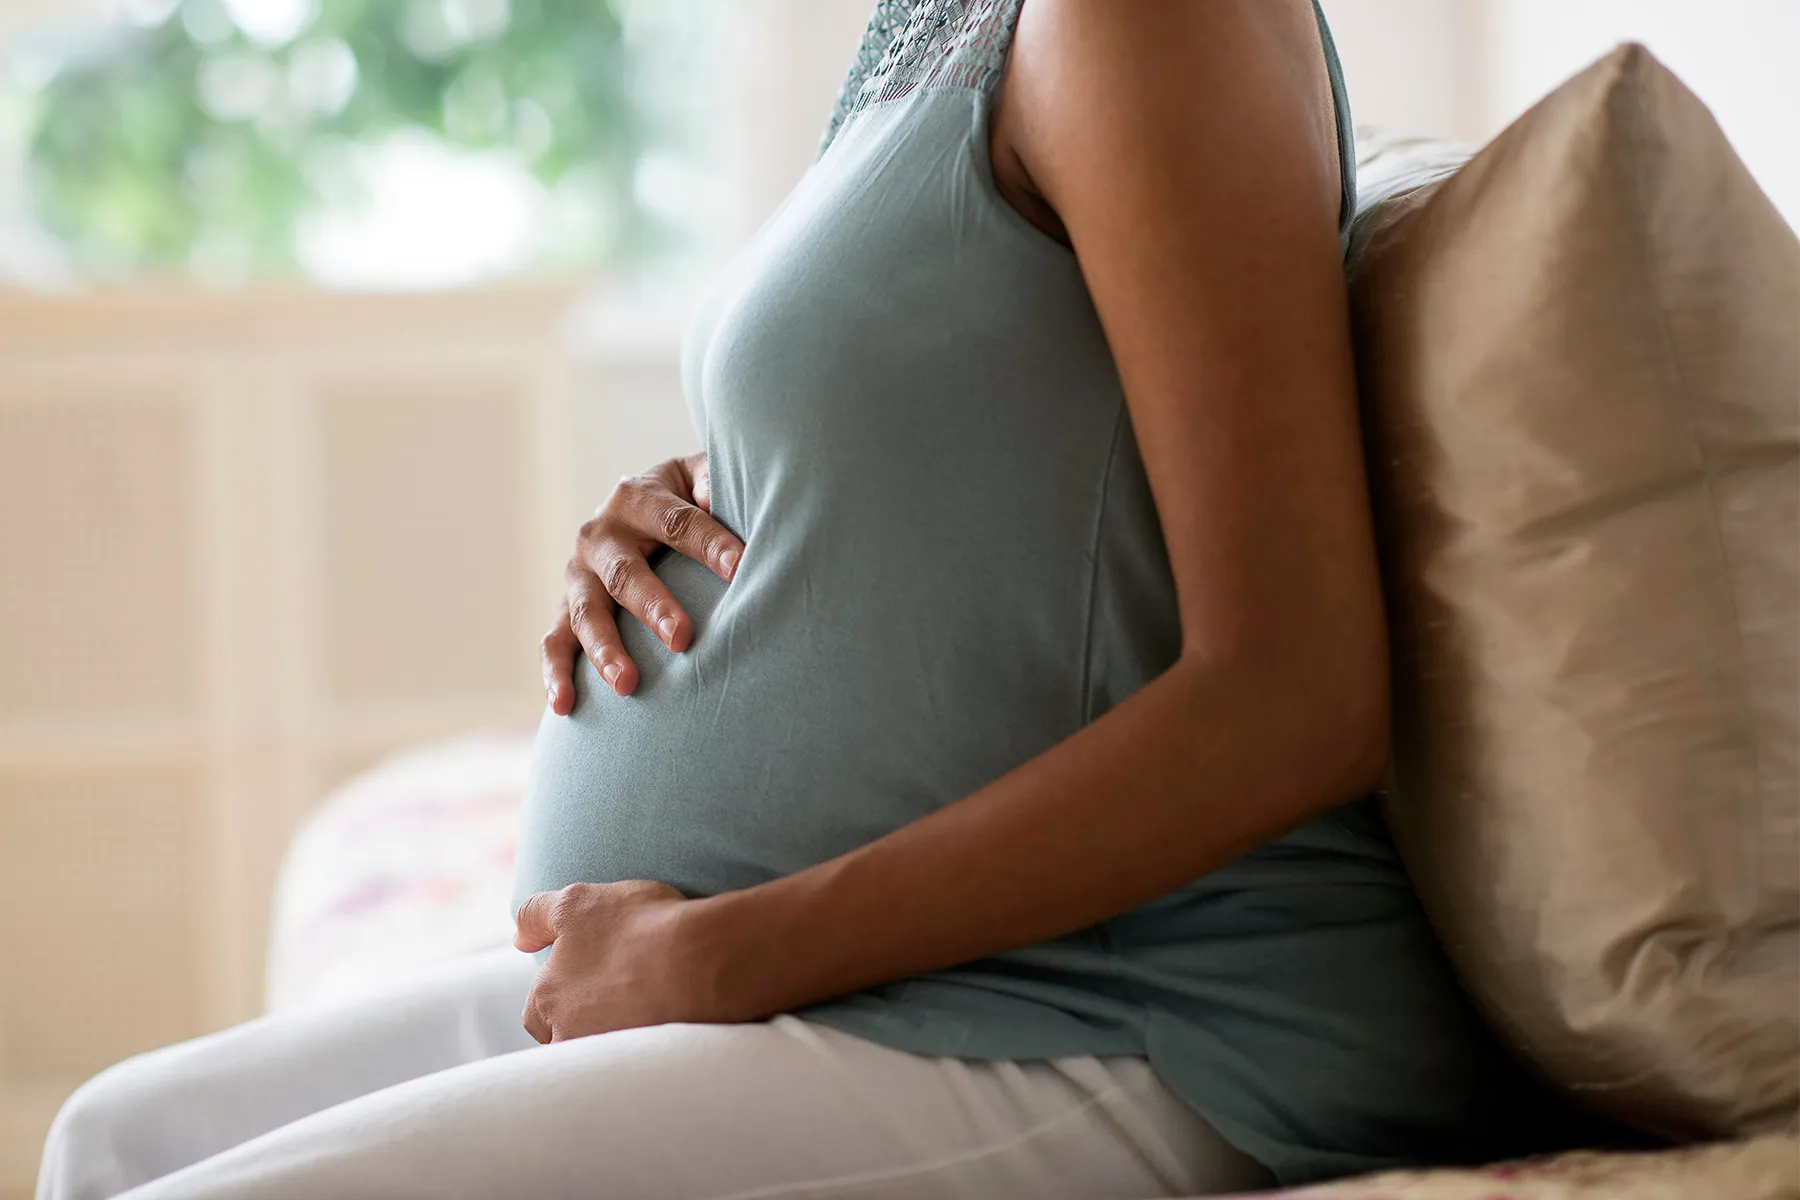 Pregnancy Complications Could Mean Lifelong Heart Risks for Women